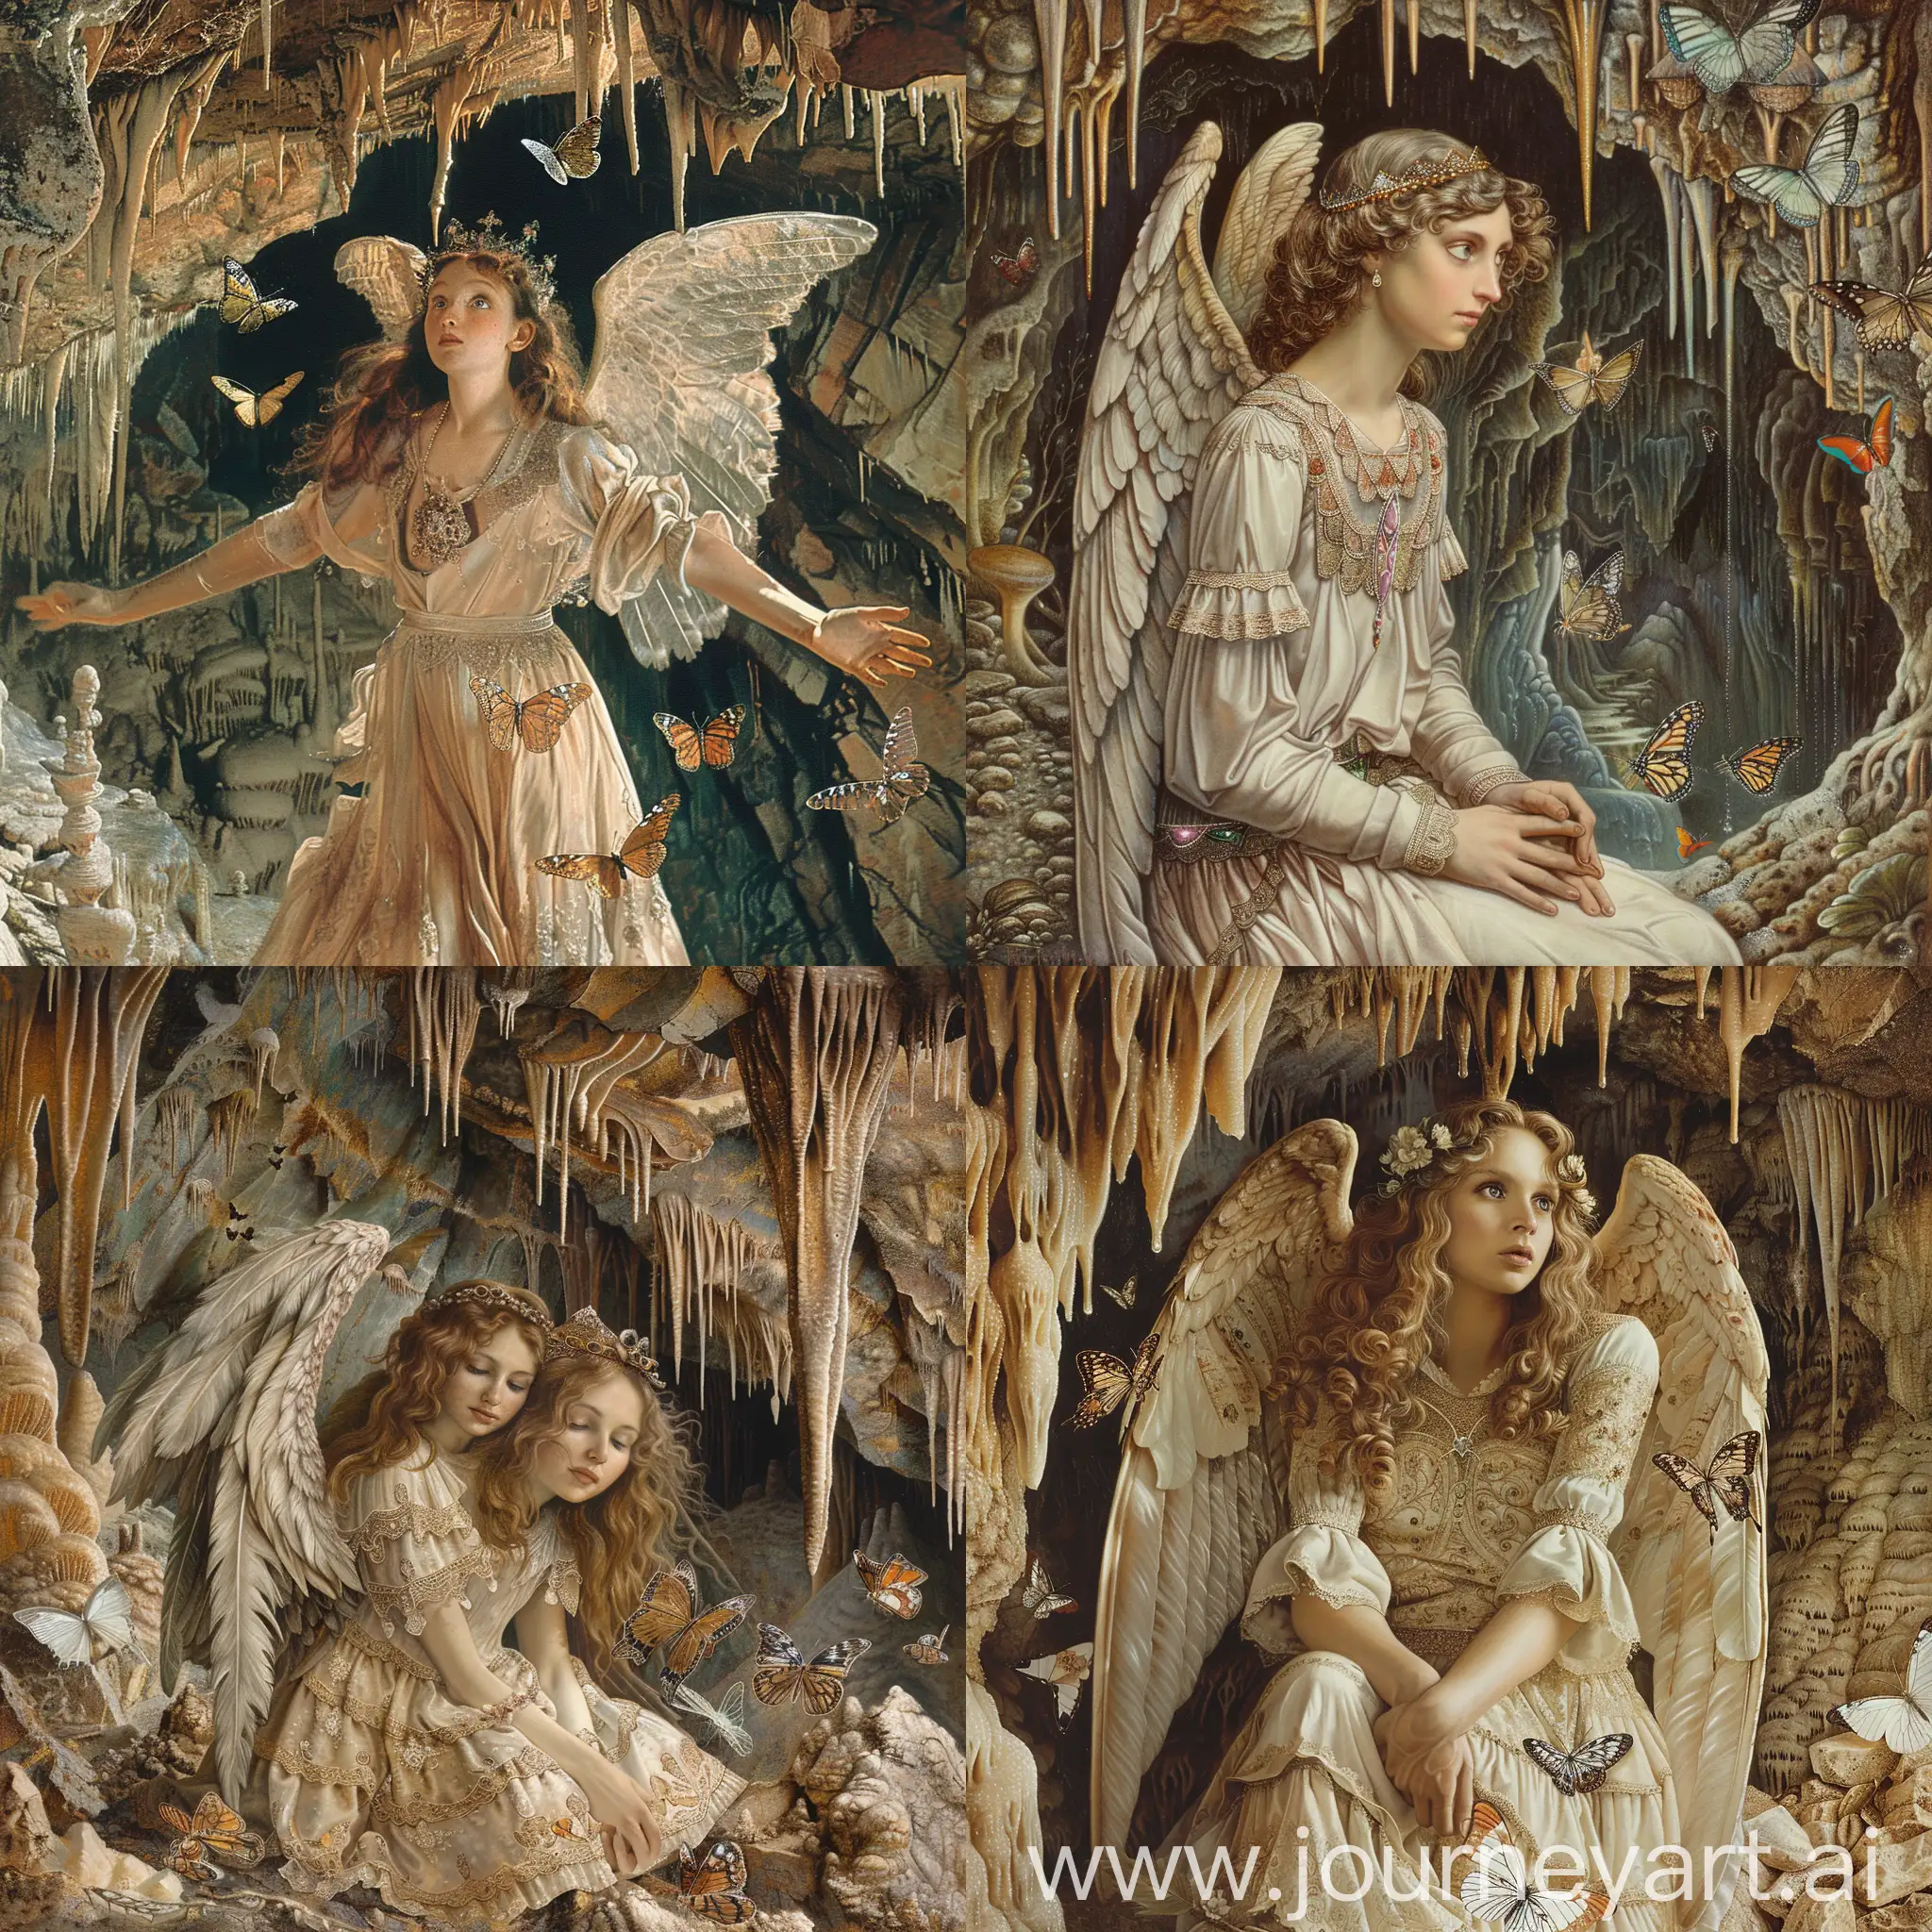 A beautiful medieval angel woman  in a cave with stalagmites and stalactites and butterflies . Pre Raphaelite 